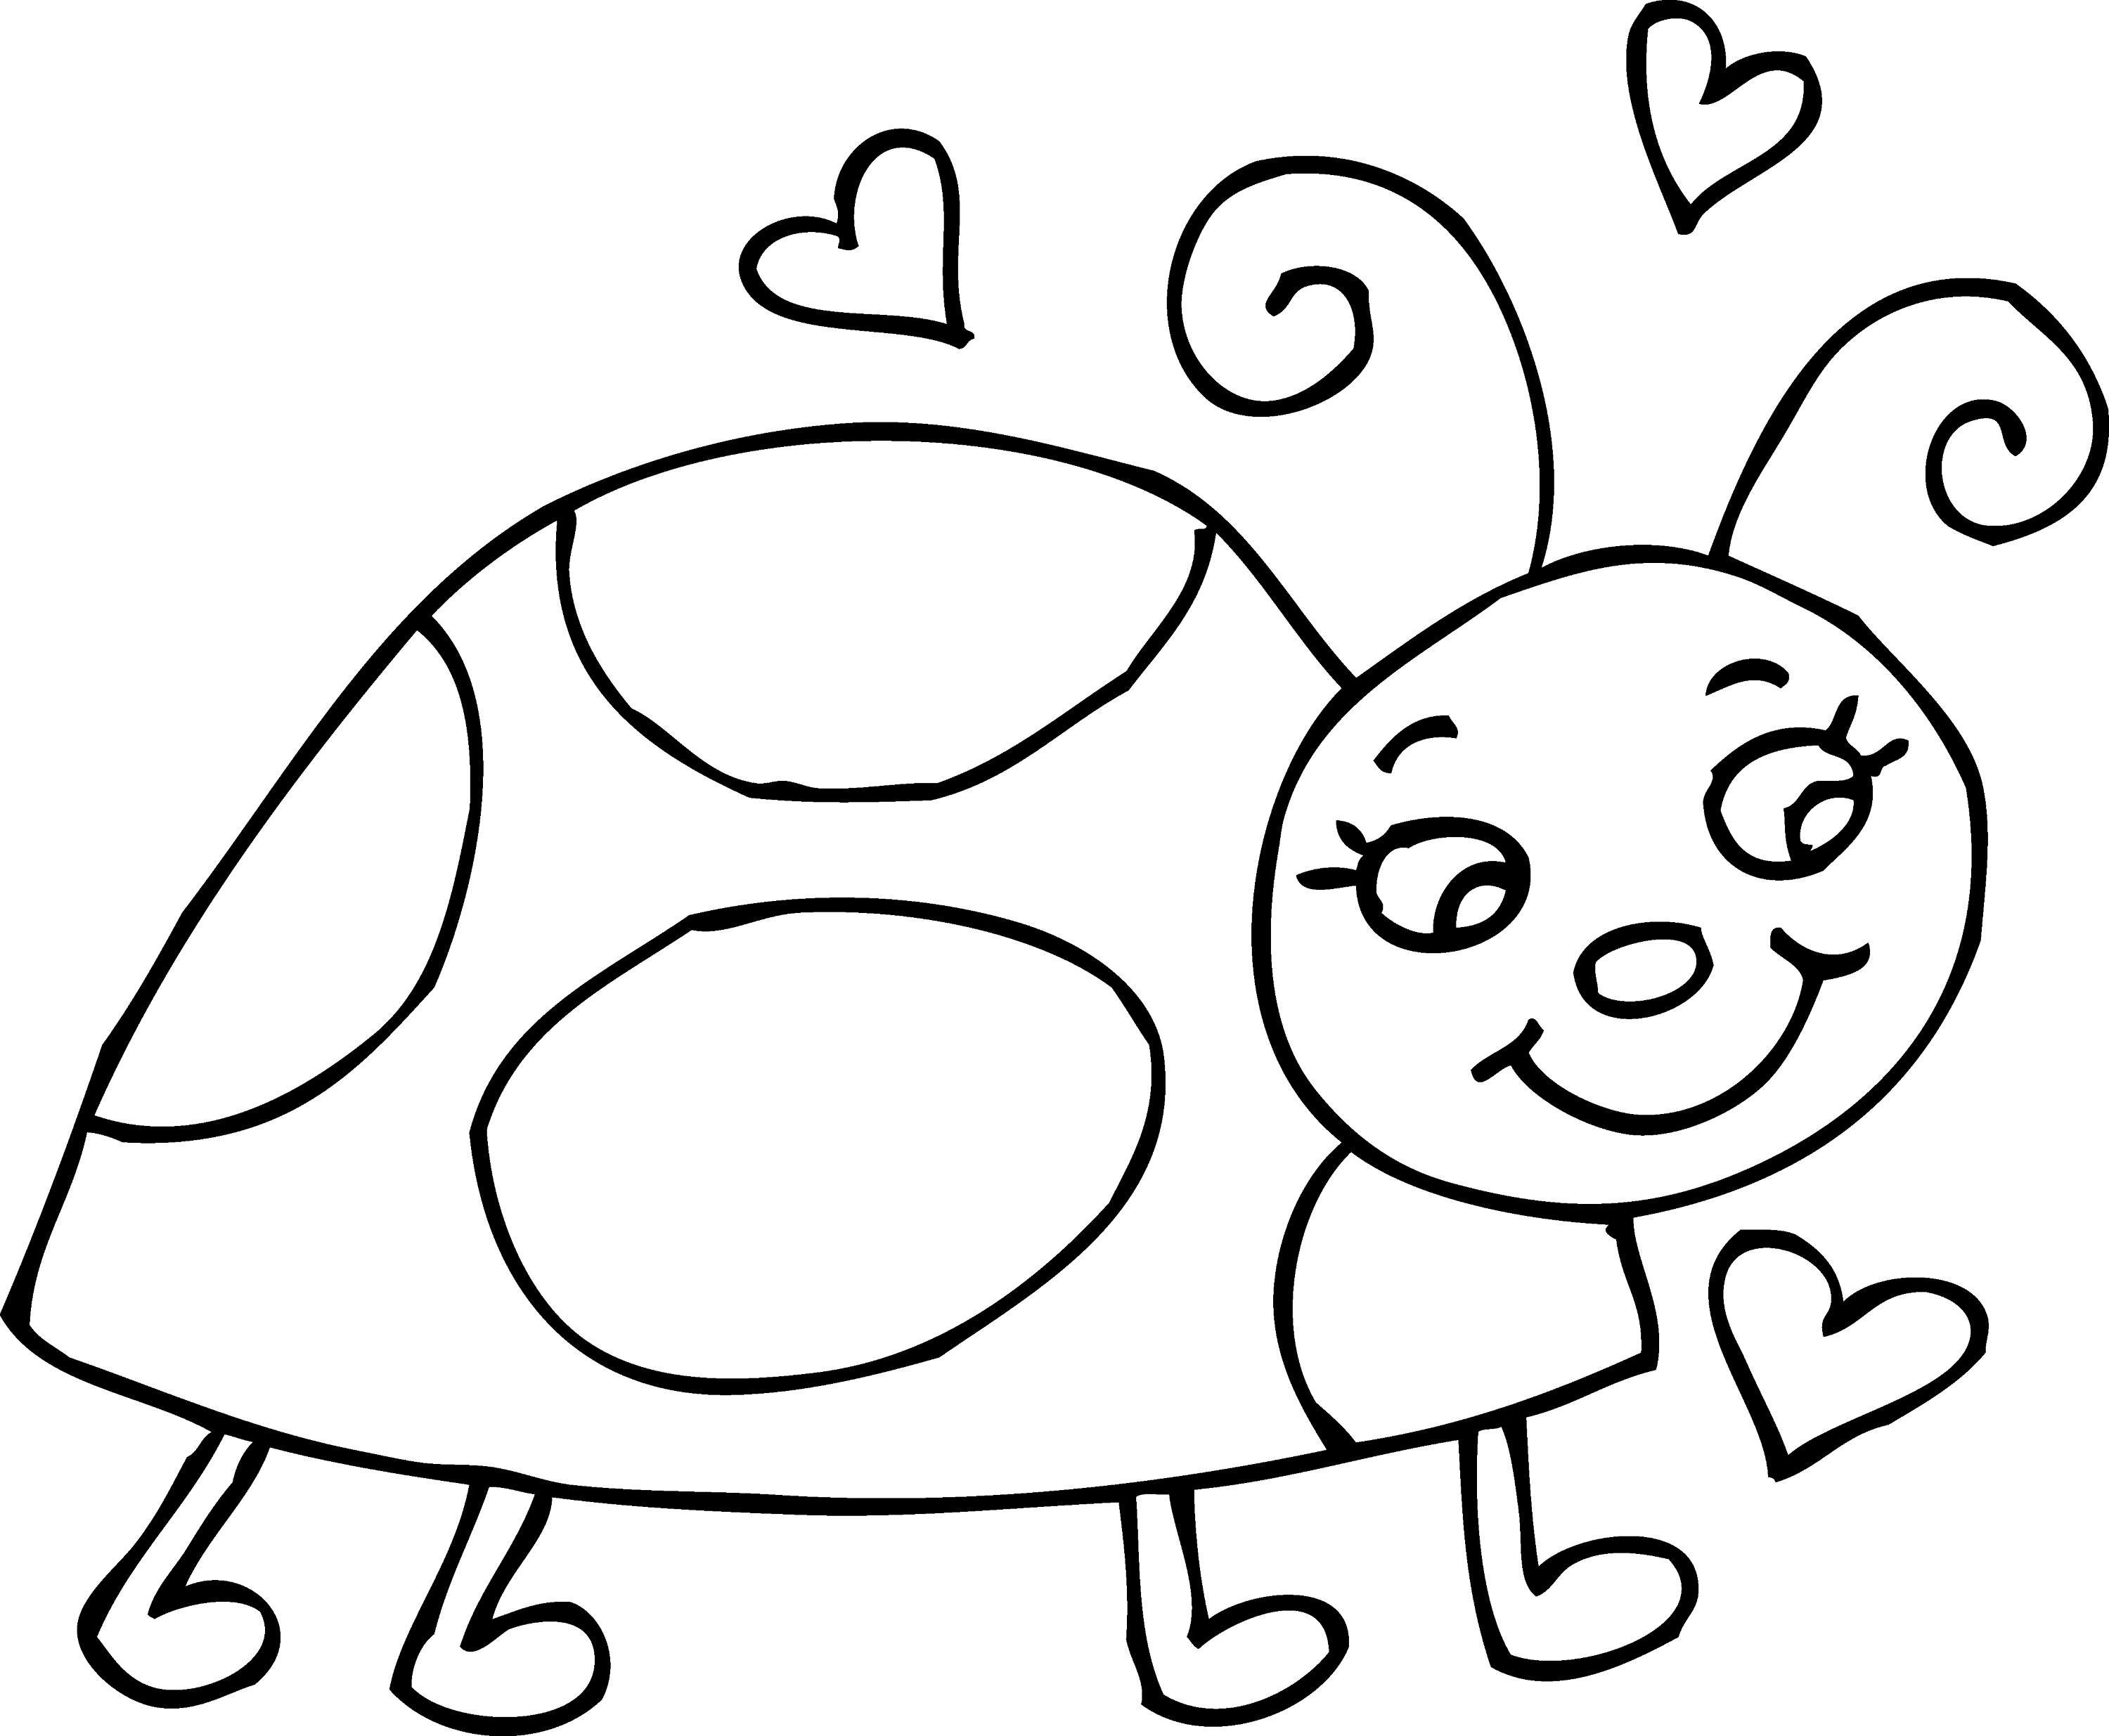 Line Art of Cute Ladybug With Hearts Free Clip Art